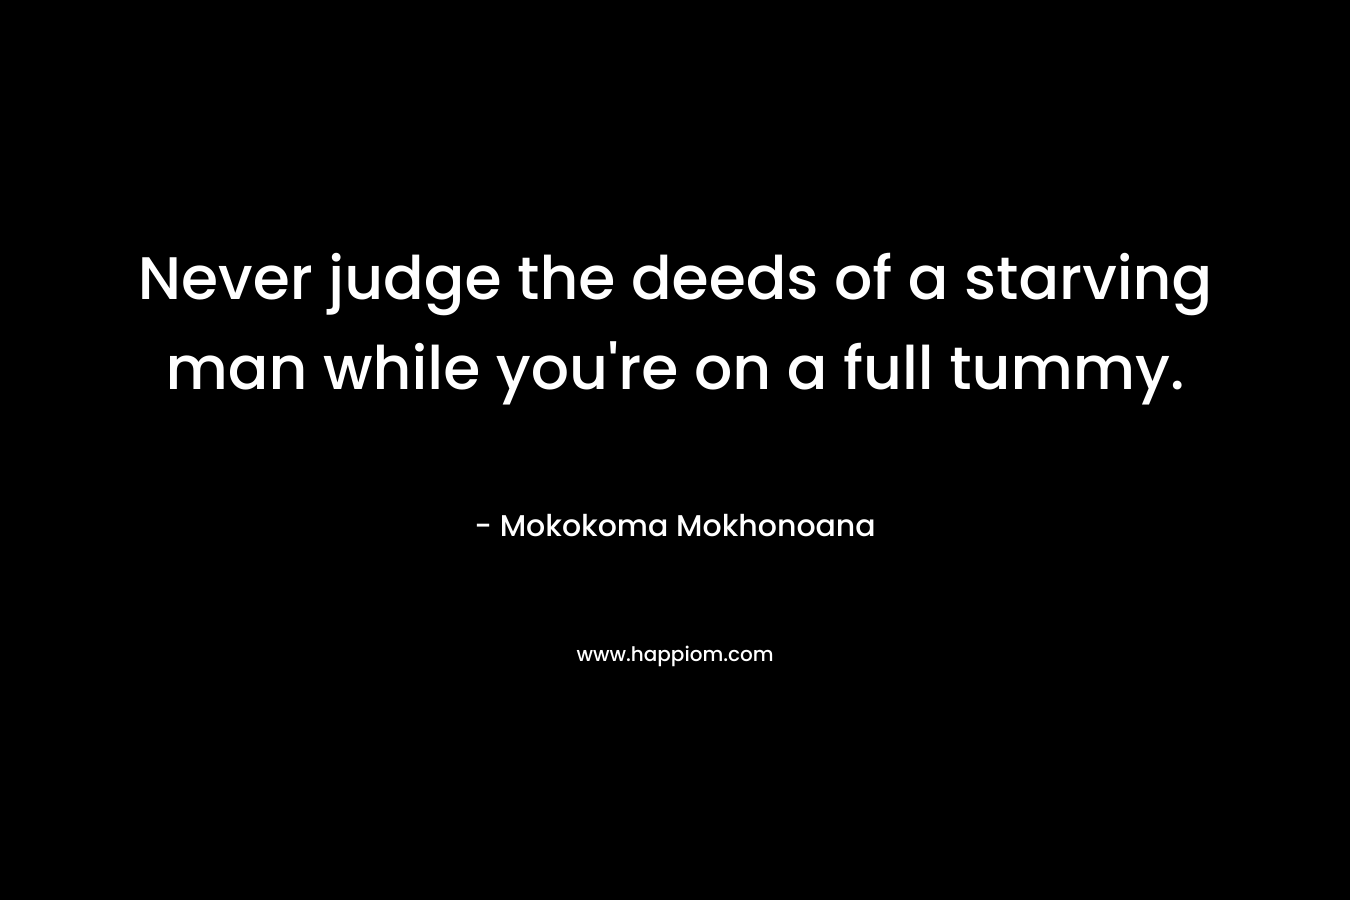 Never judge the deeds of a starving man while you're on a full tummy.